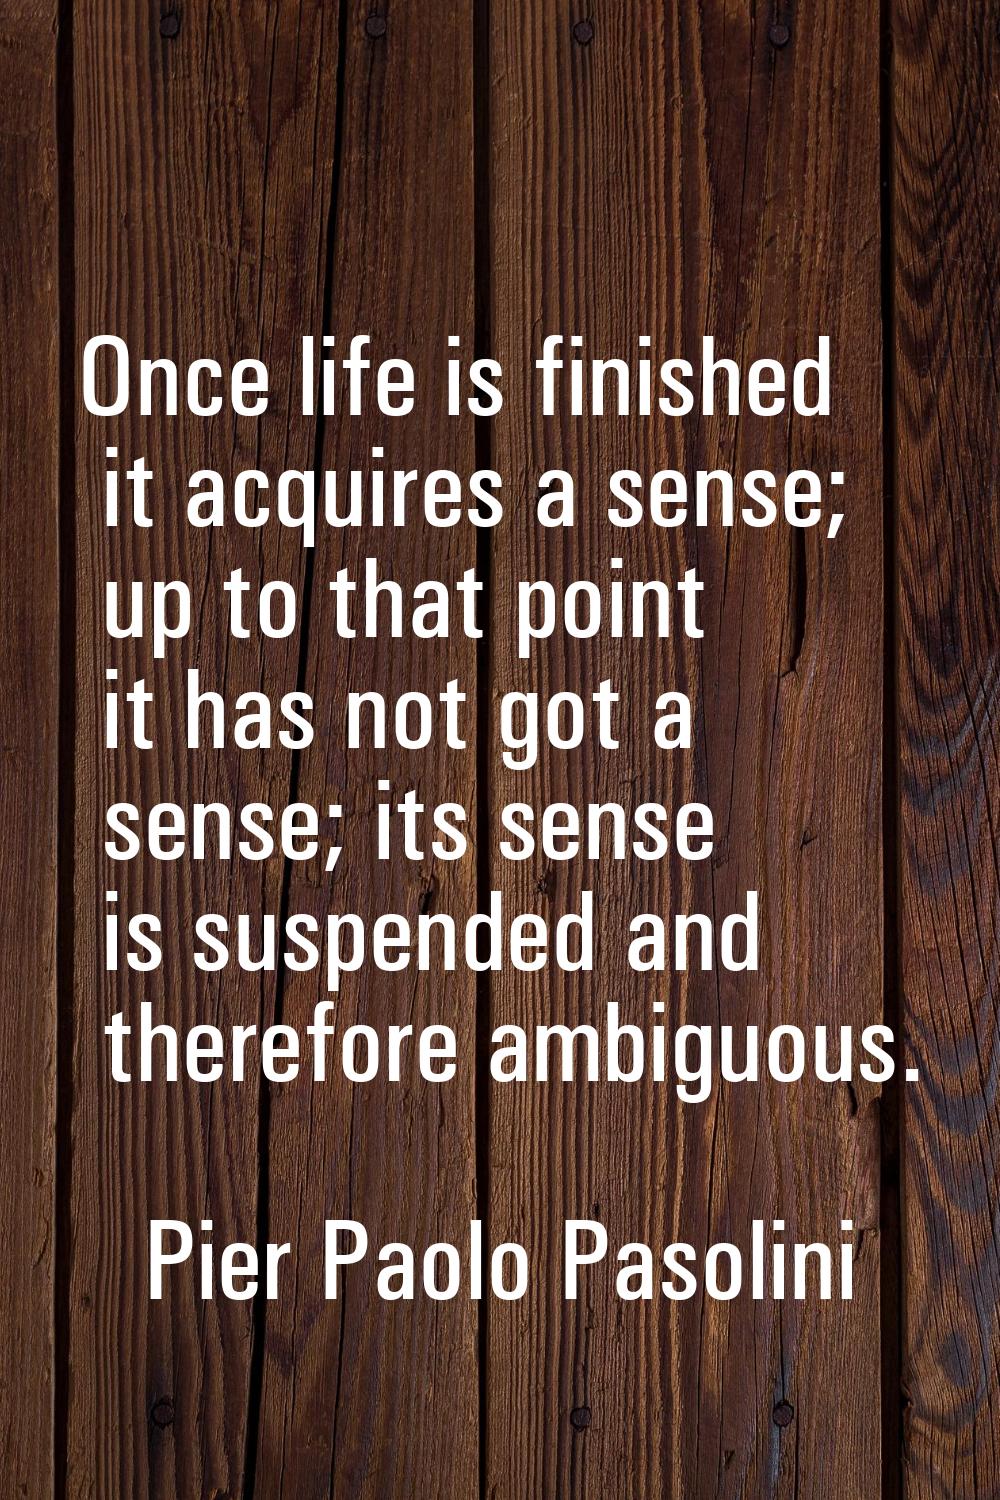 Once life is finished it acquires a sense; up to that point it has not got a sense; its sense is su